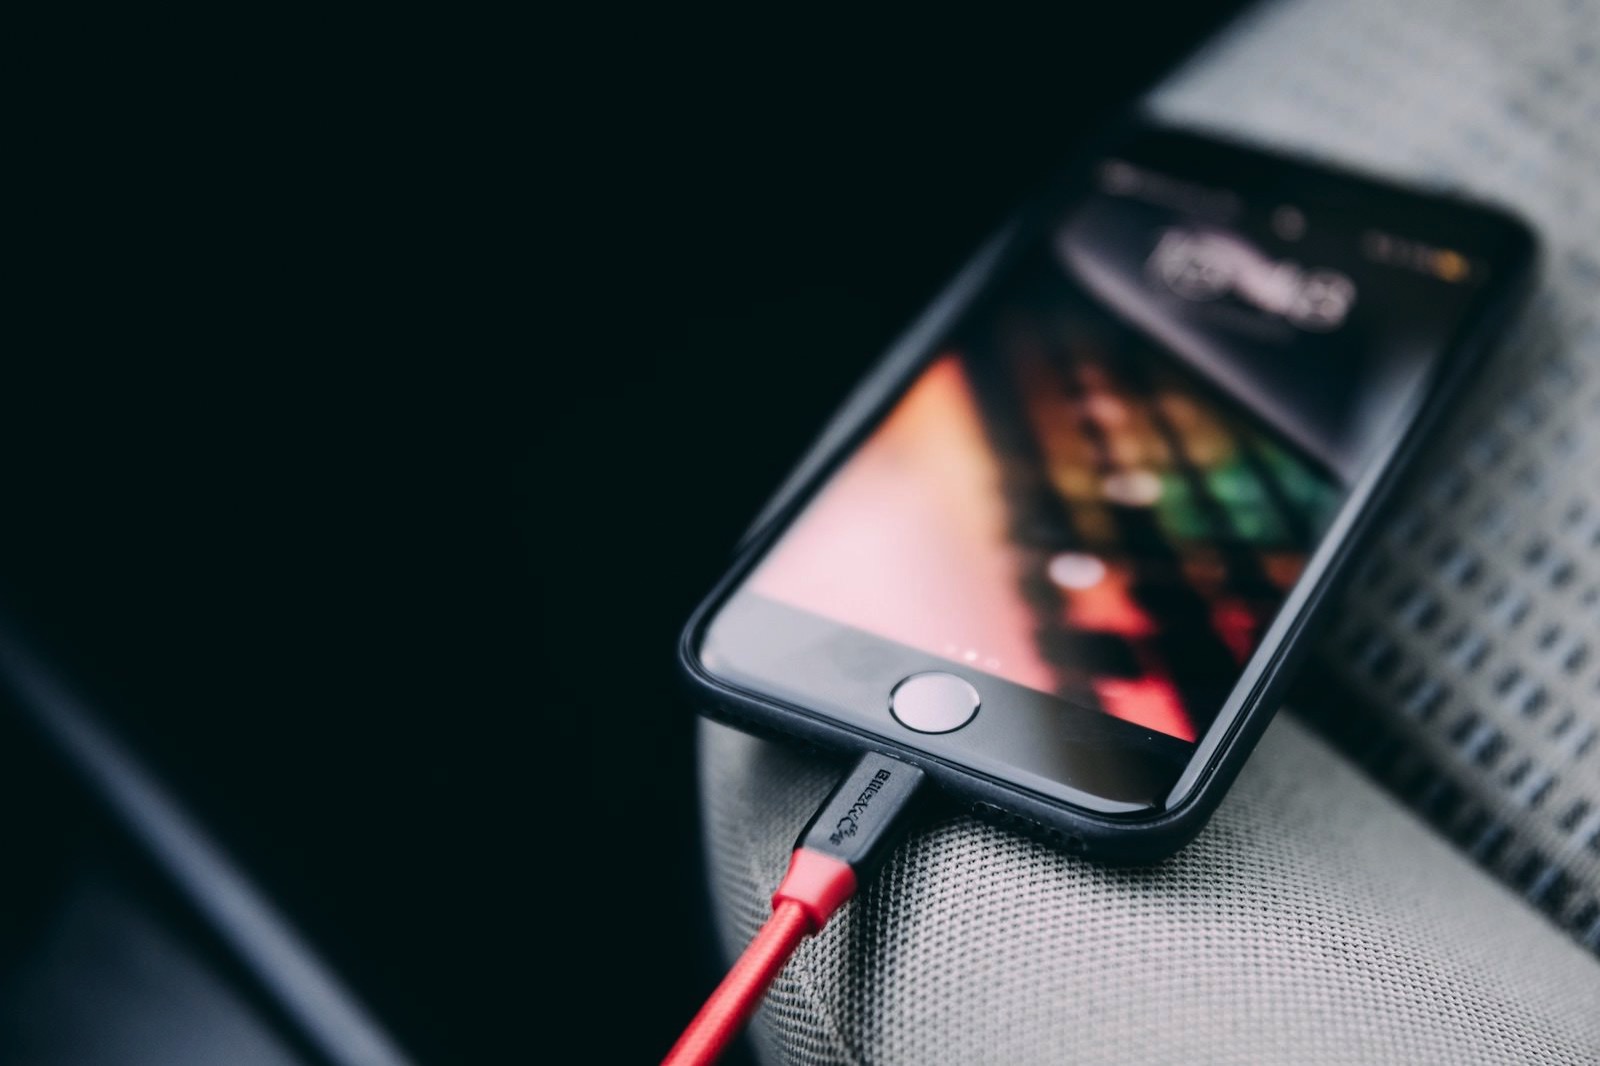 bence-boros-526291-unsplash-iphone-charging-with-cable.jpg